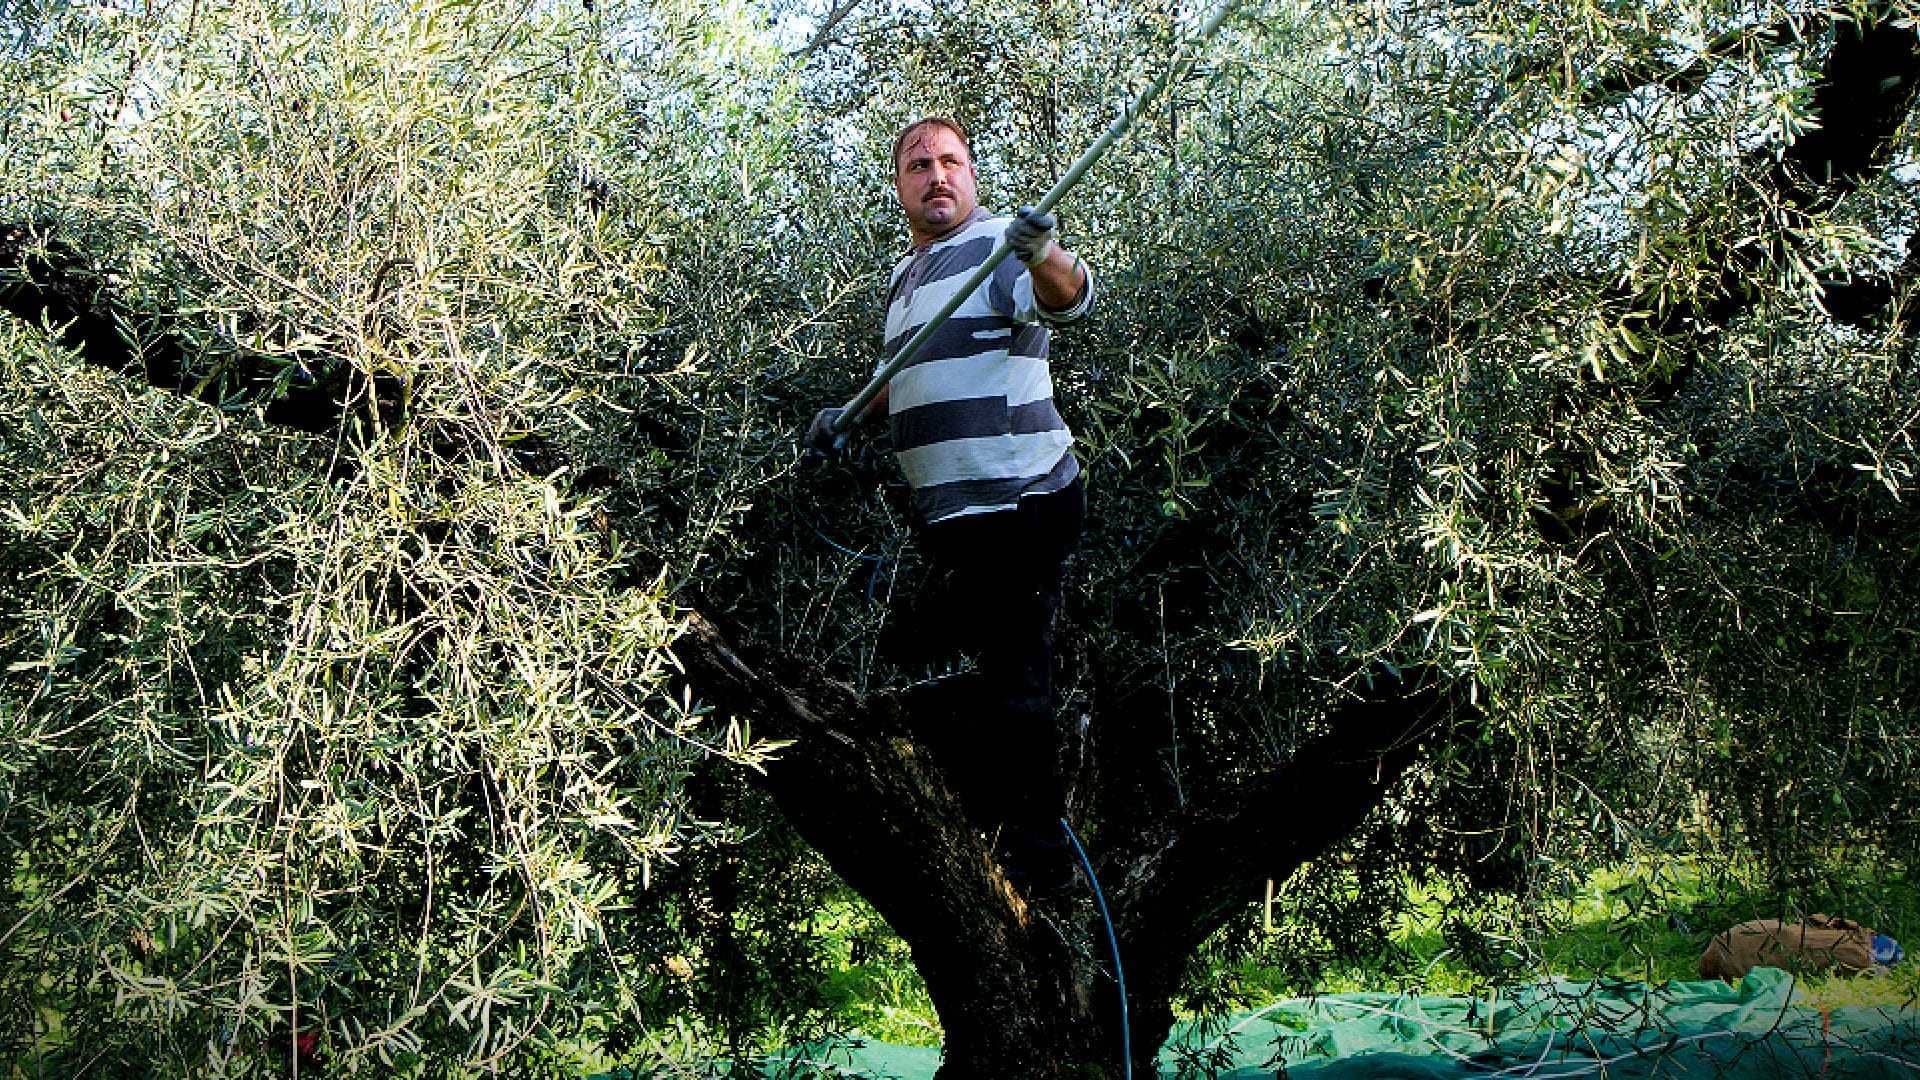 business-europe-production-second-wave-of-covid-hampers-harvest-in-greece-olive-oil-times